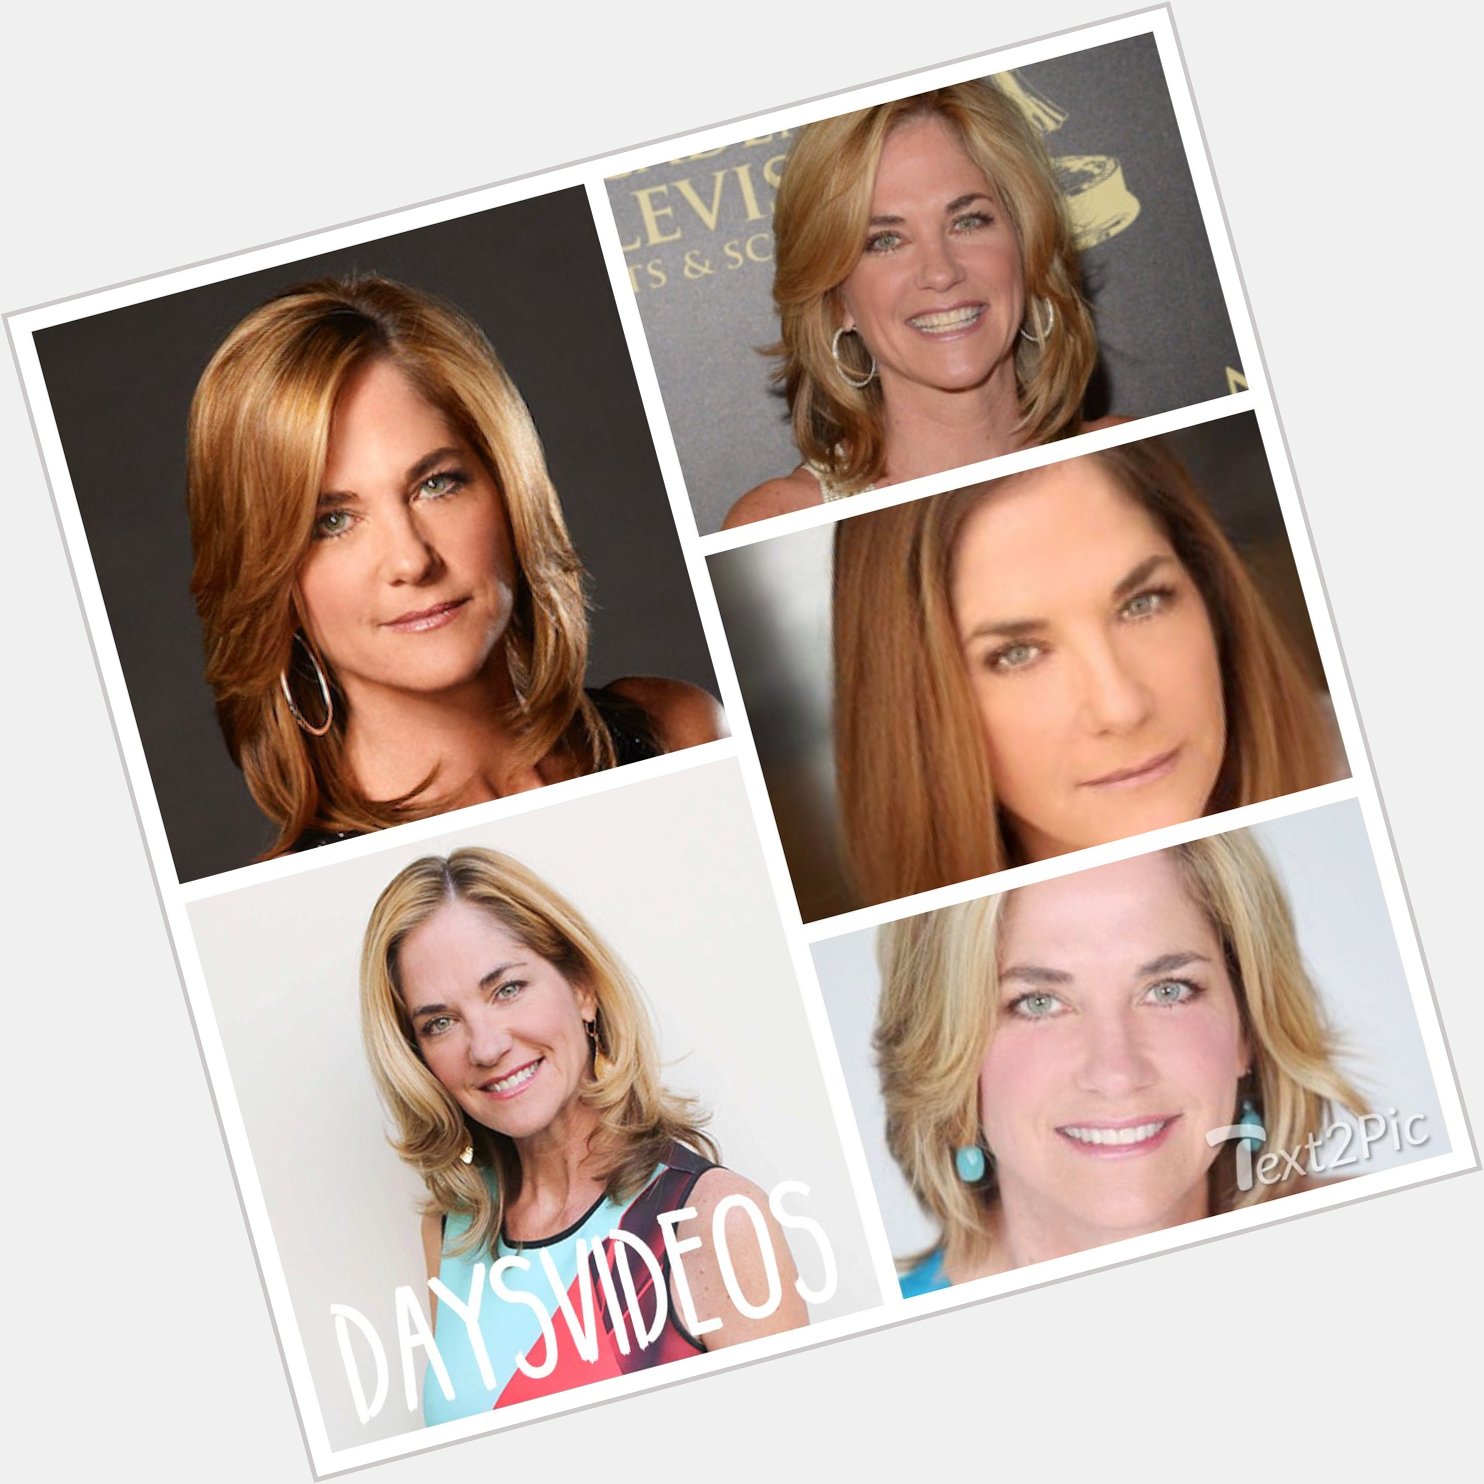 Happy Birthday to Kassie DePaiva (Eve) who turns 56 today!  